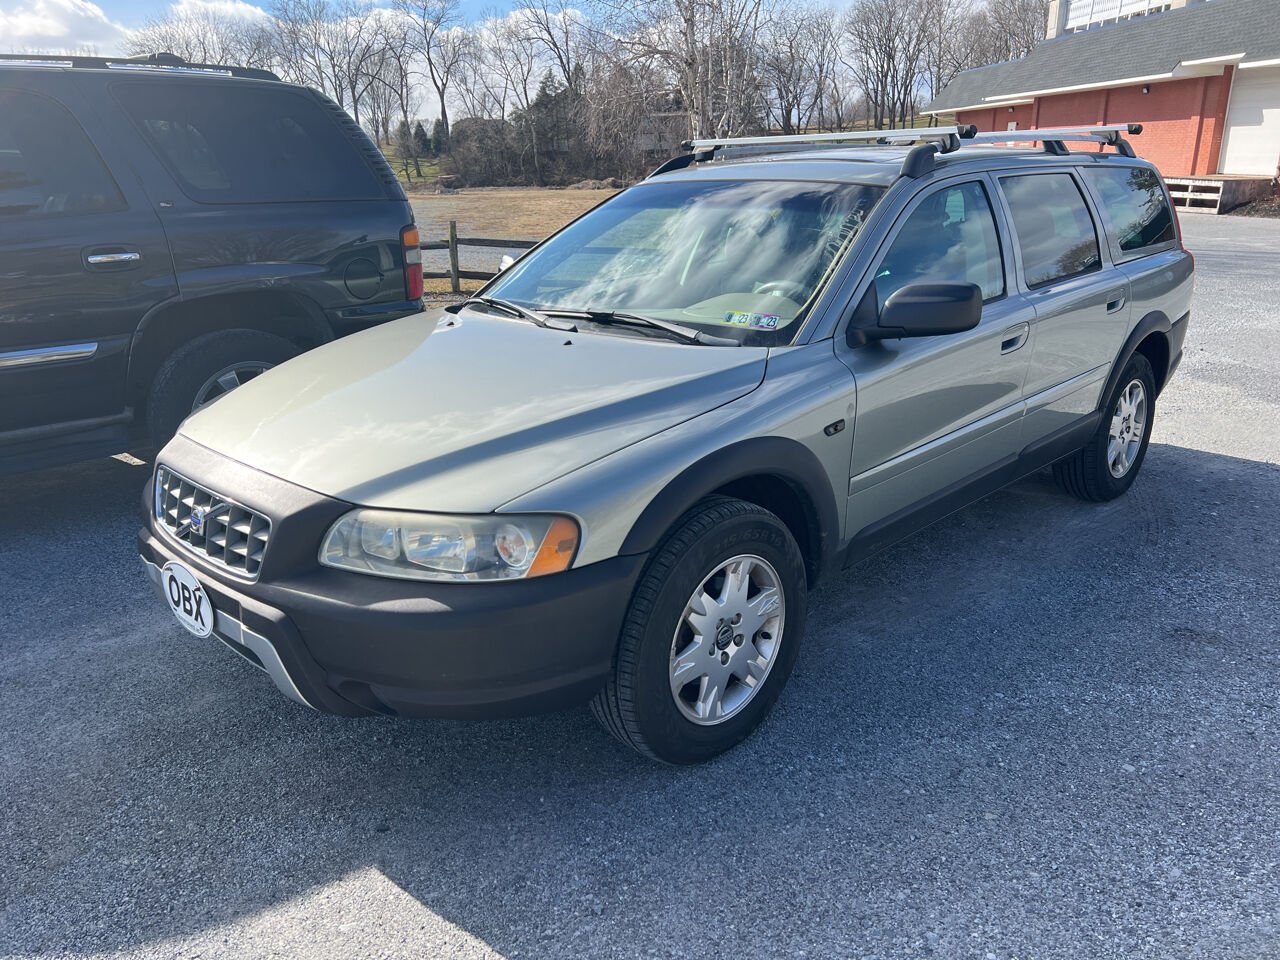 2006 Volvo XC70 For Sale - Carsforsale.com®